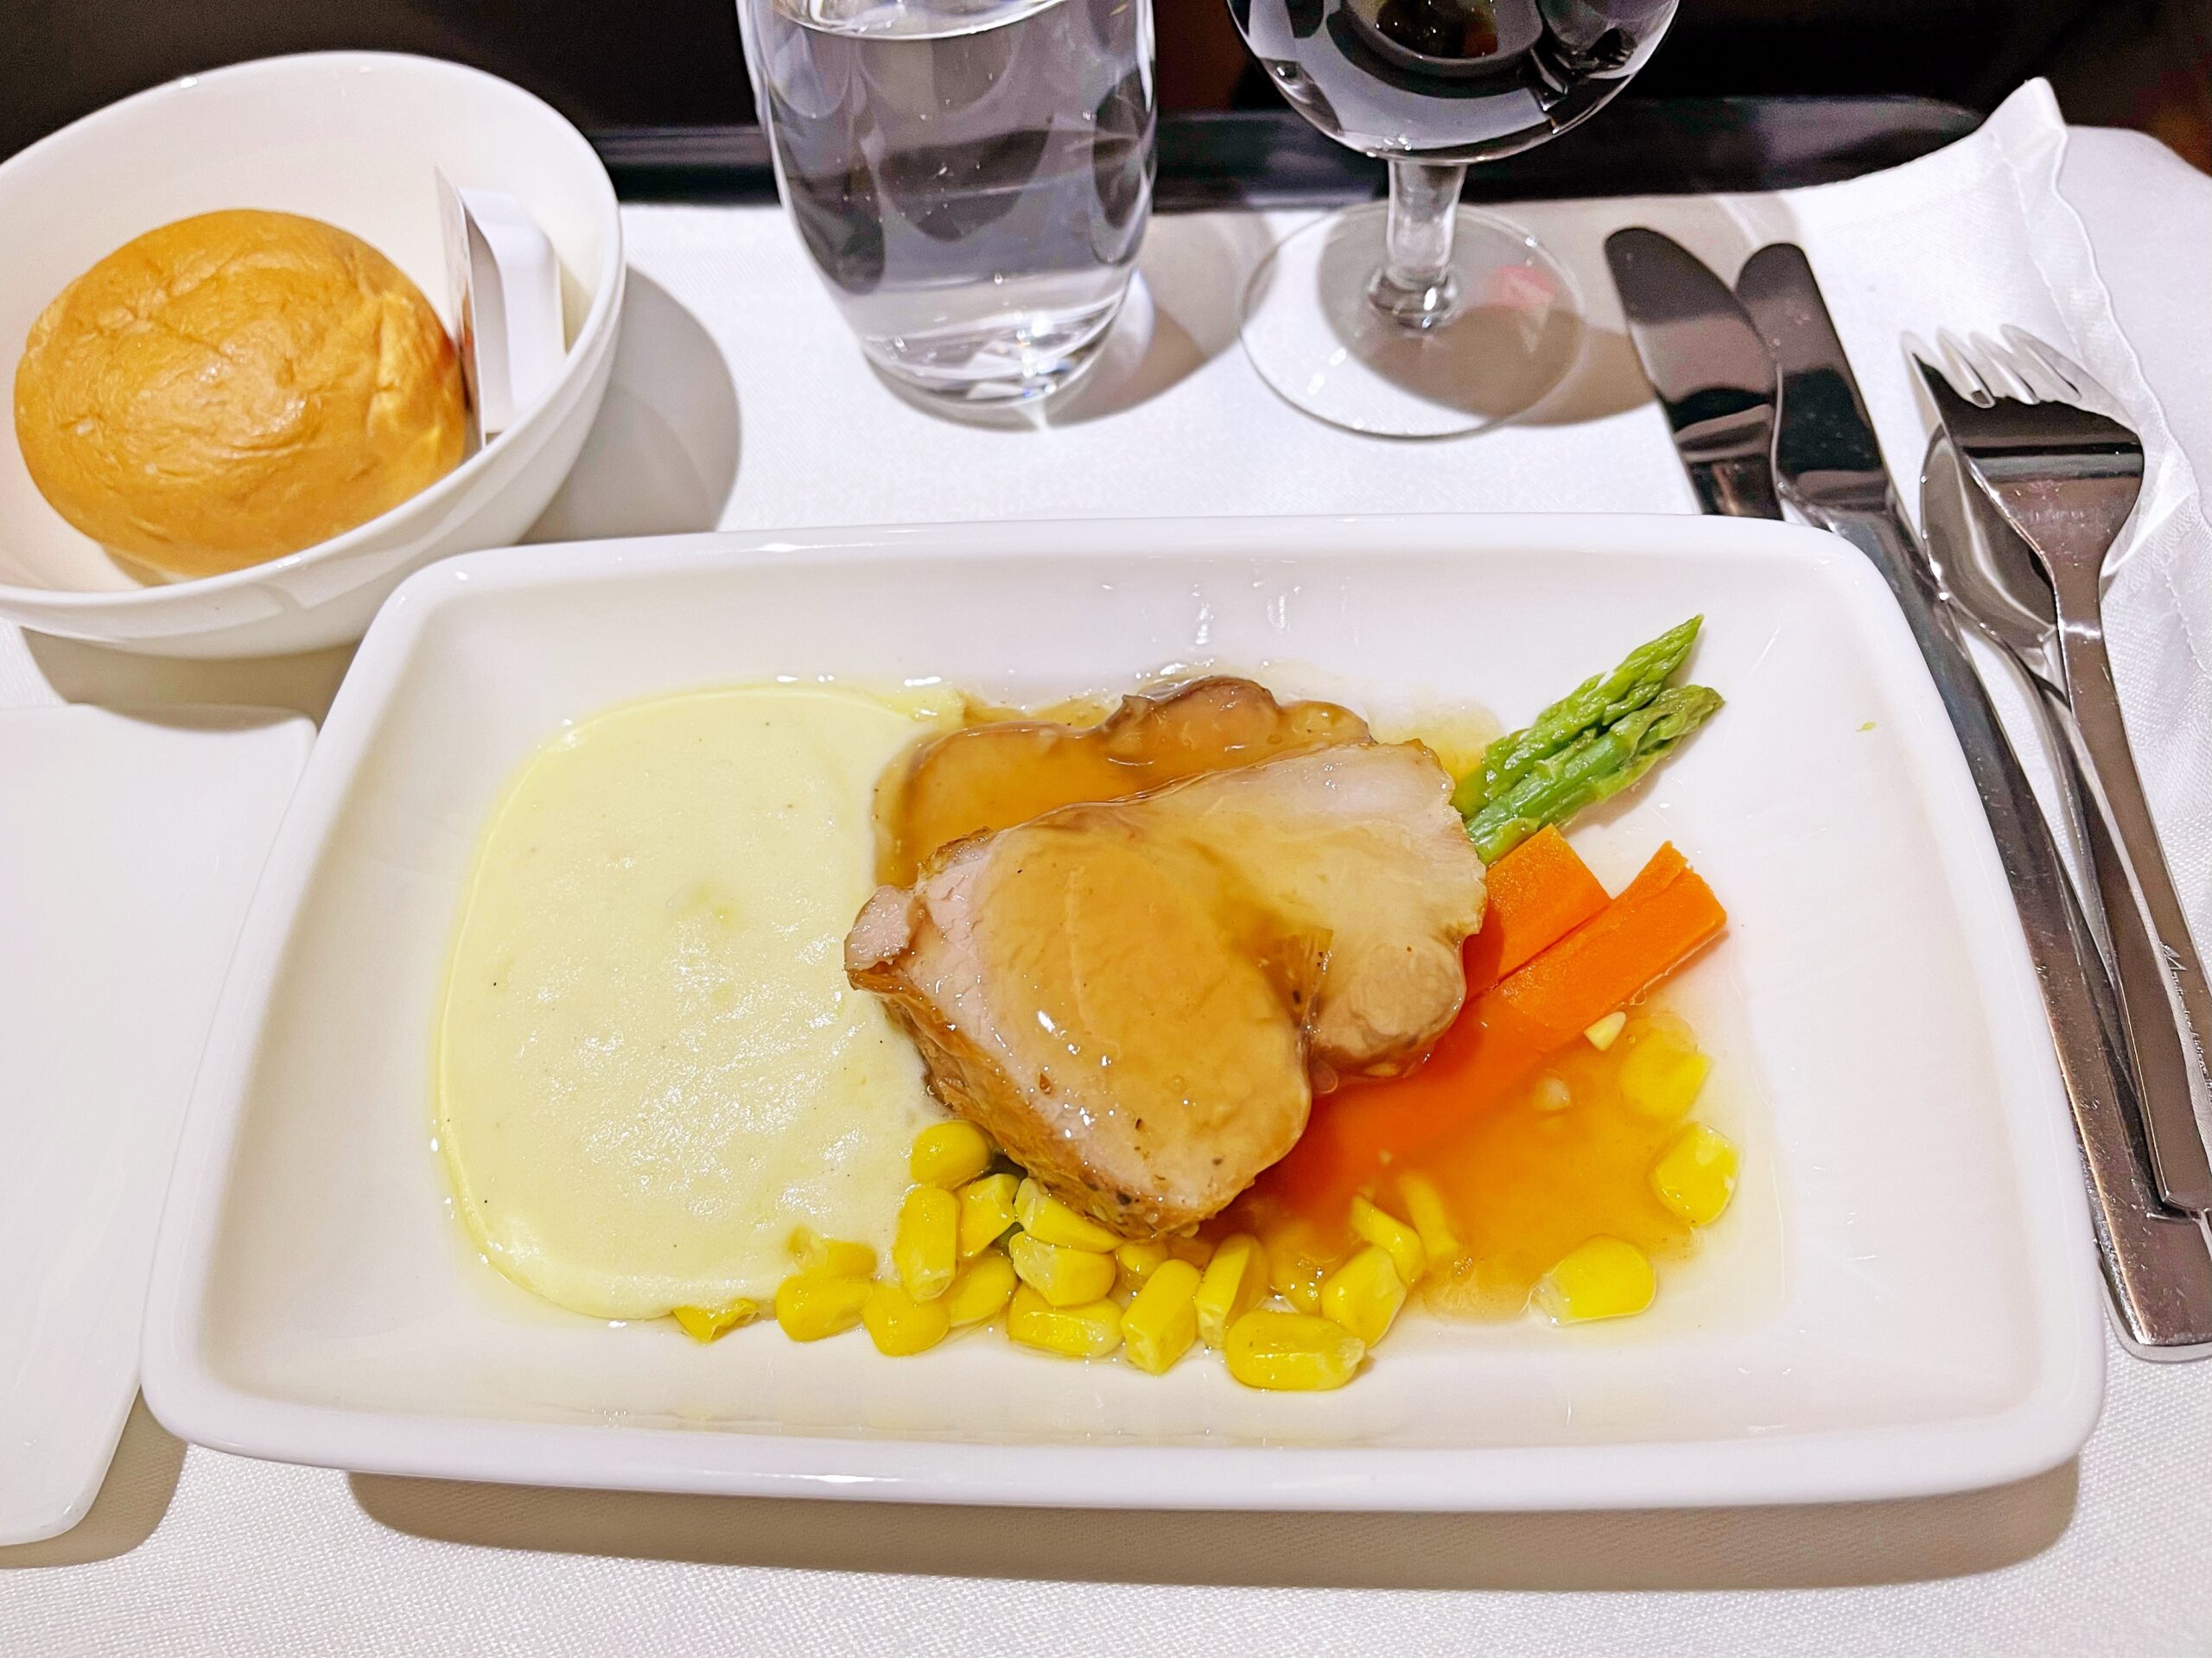 Delicious Food at Philippine Airlines Business Class Seat Manila to Sydney Flight